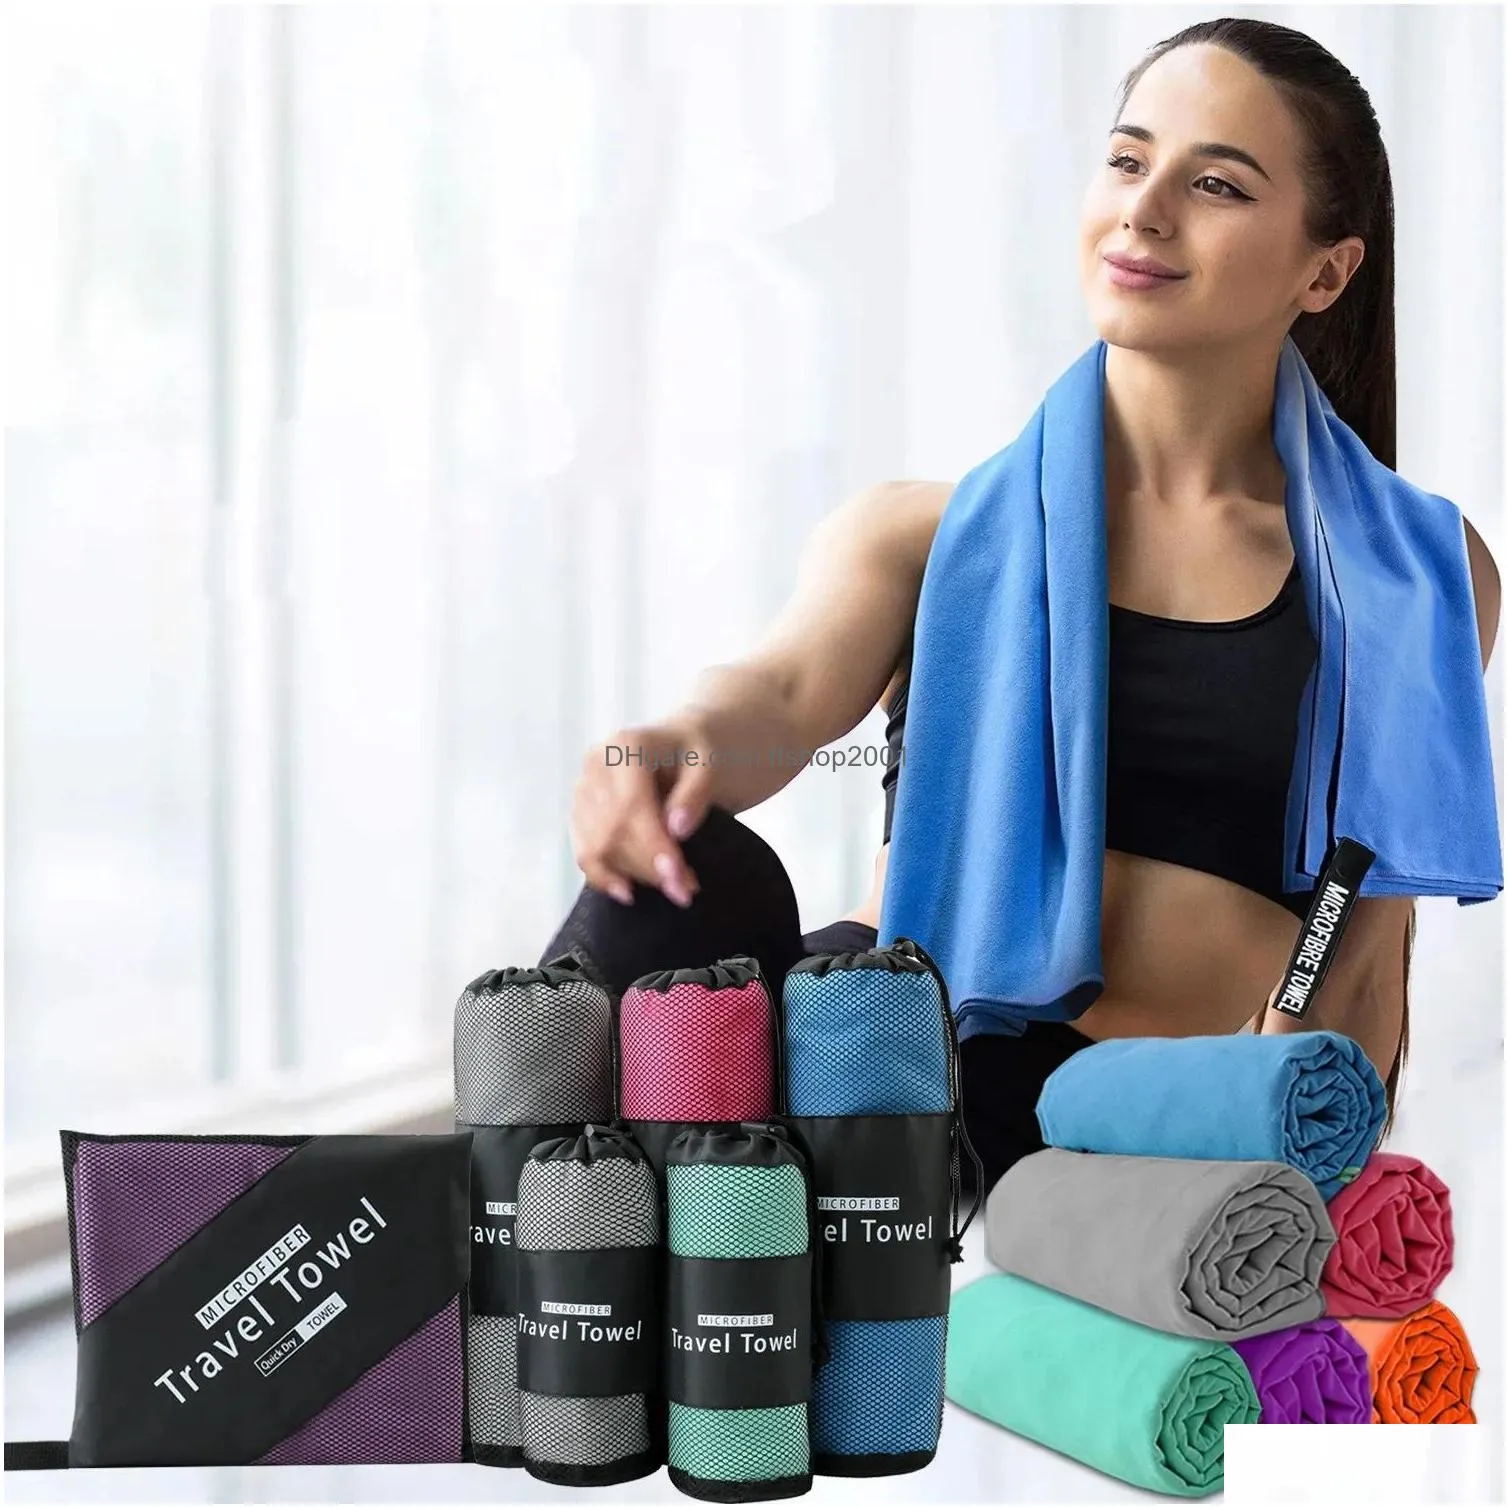  microfiber towel sports quick-drying super absorbent camping towel super soft and lightweight gym swimming yoga beach towel